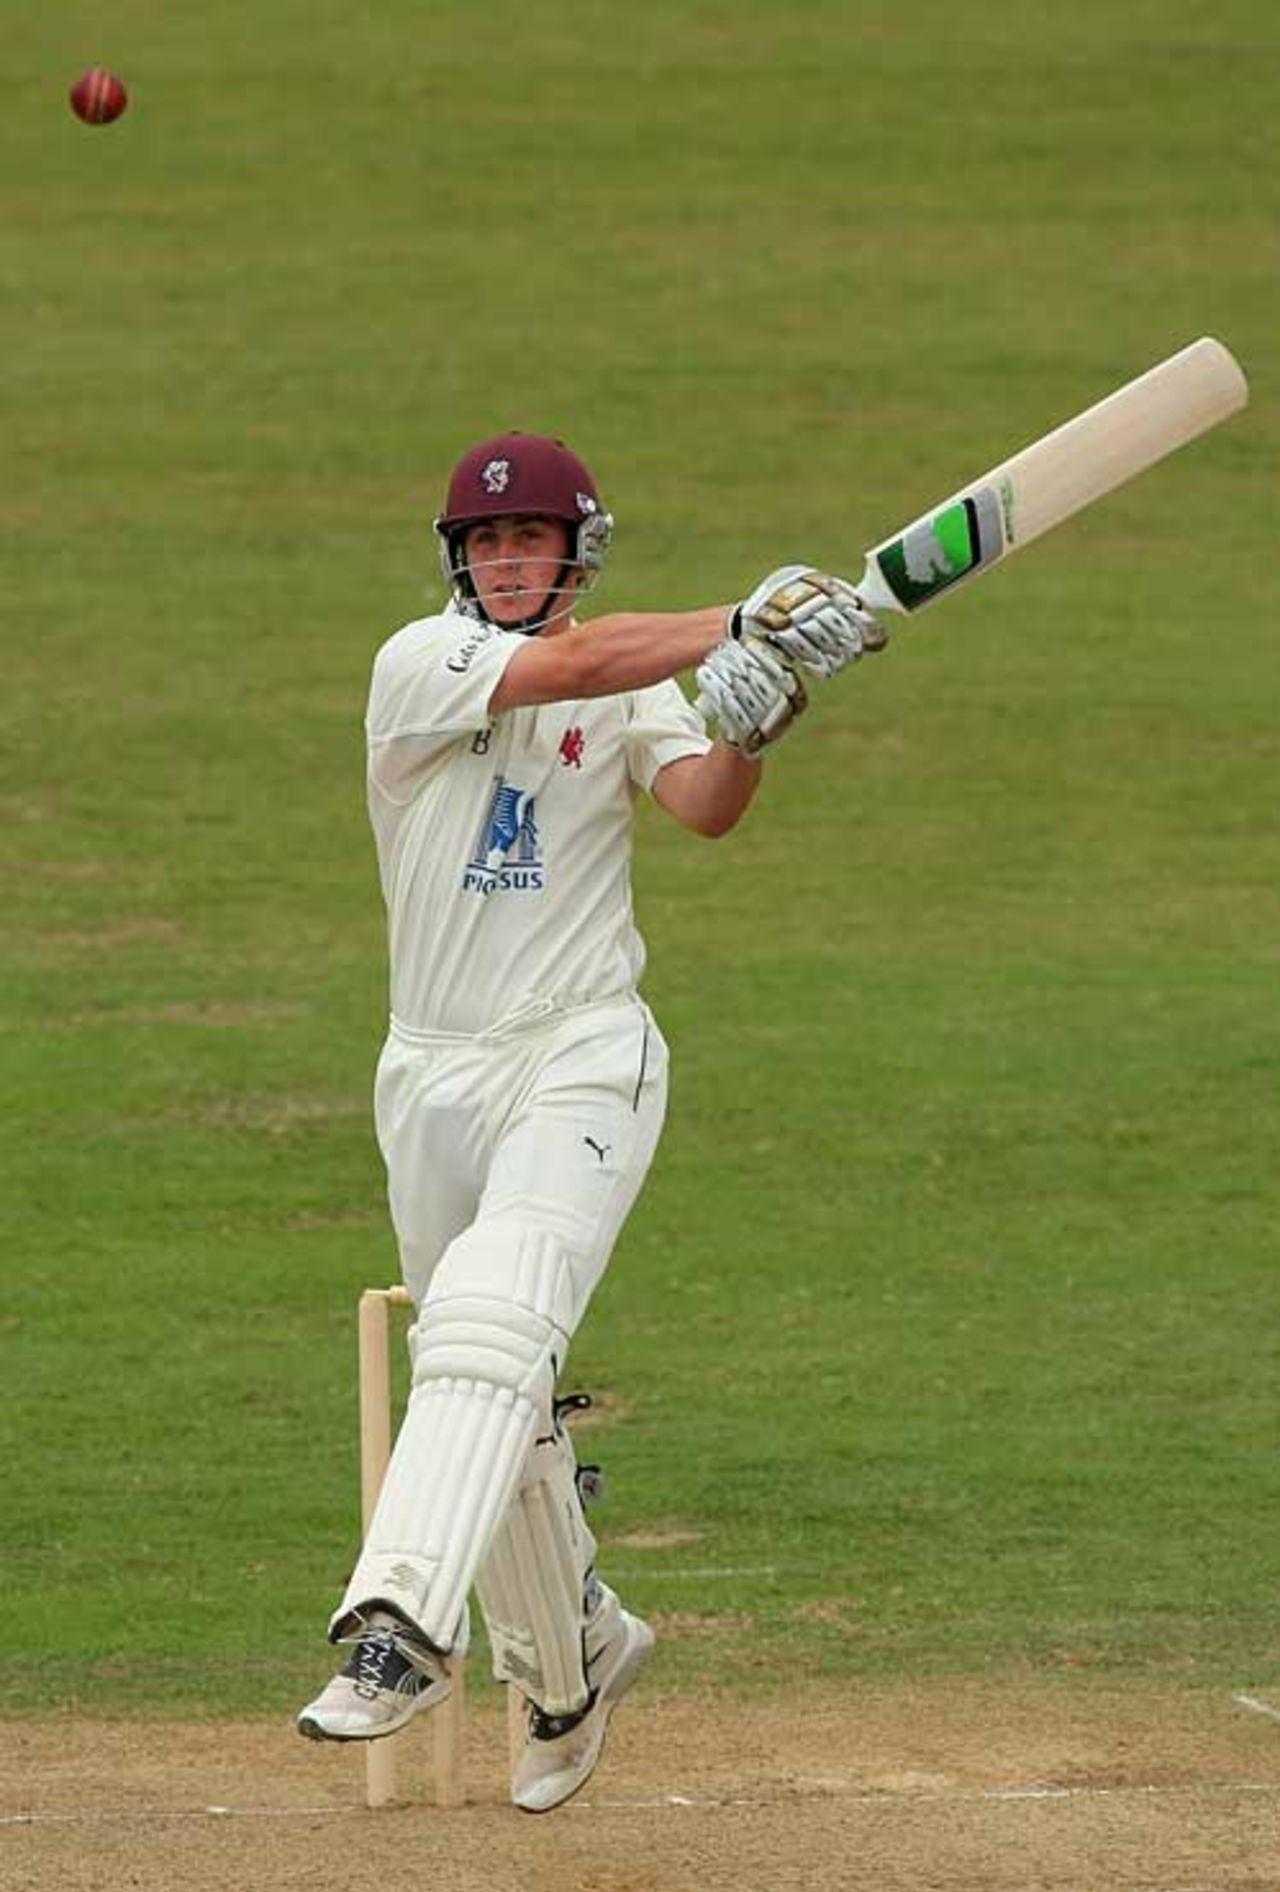 Craig Kieswetter took the attack to the South Africans, Somerset v South Africans, 2nd day, Taunton, June 30, 2008